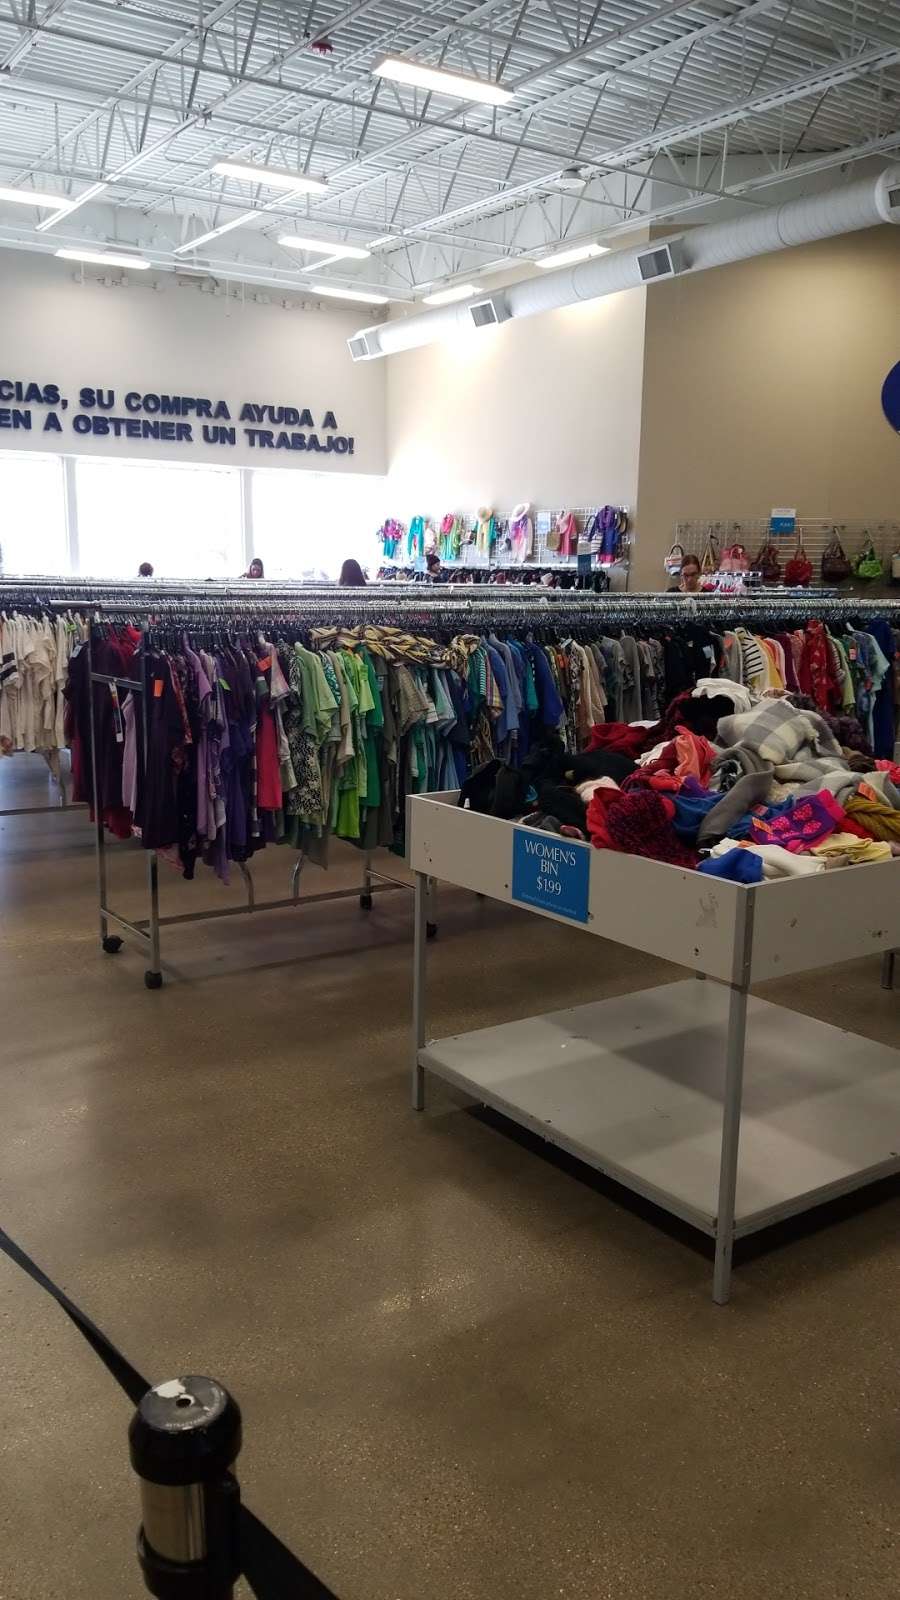 Goodwill Store & Donation Center | 746 S Rand Rd, Lake Zurich, IL 60047, USA | Phone: (847) 550-0769